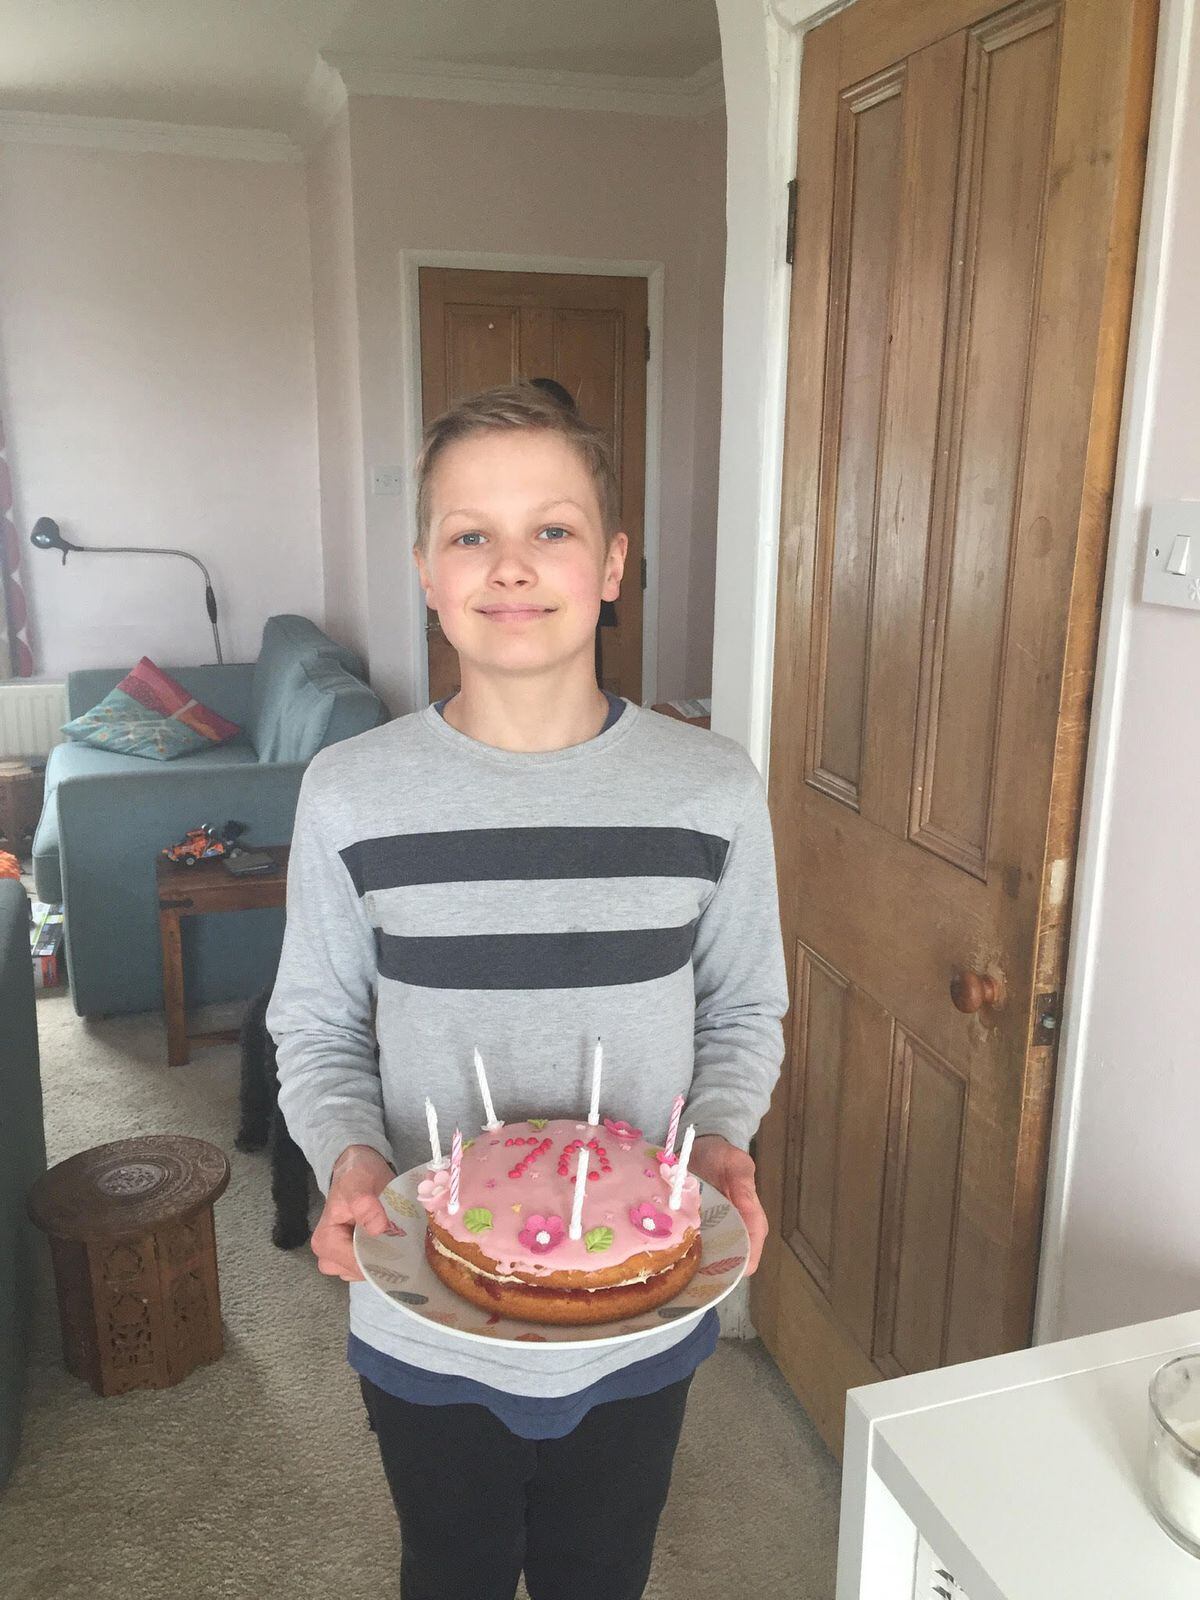 Sam Bruton, 11, from Shrewsbury, baked a birthday cake for his Nanny who has just turned 70. We left it on a bench outside her house.